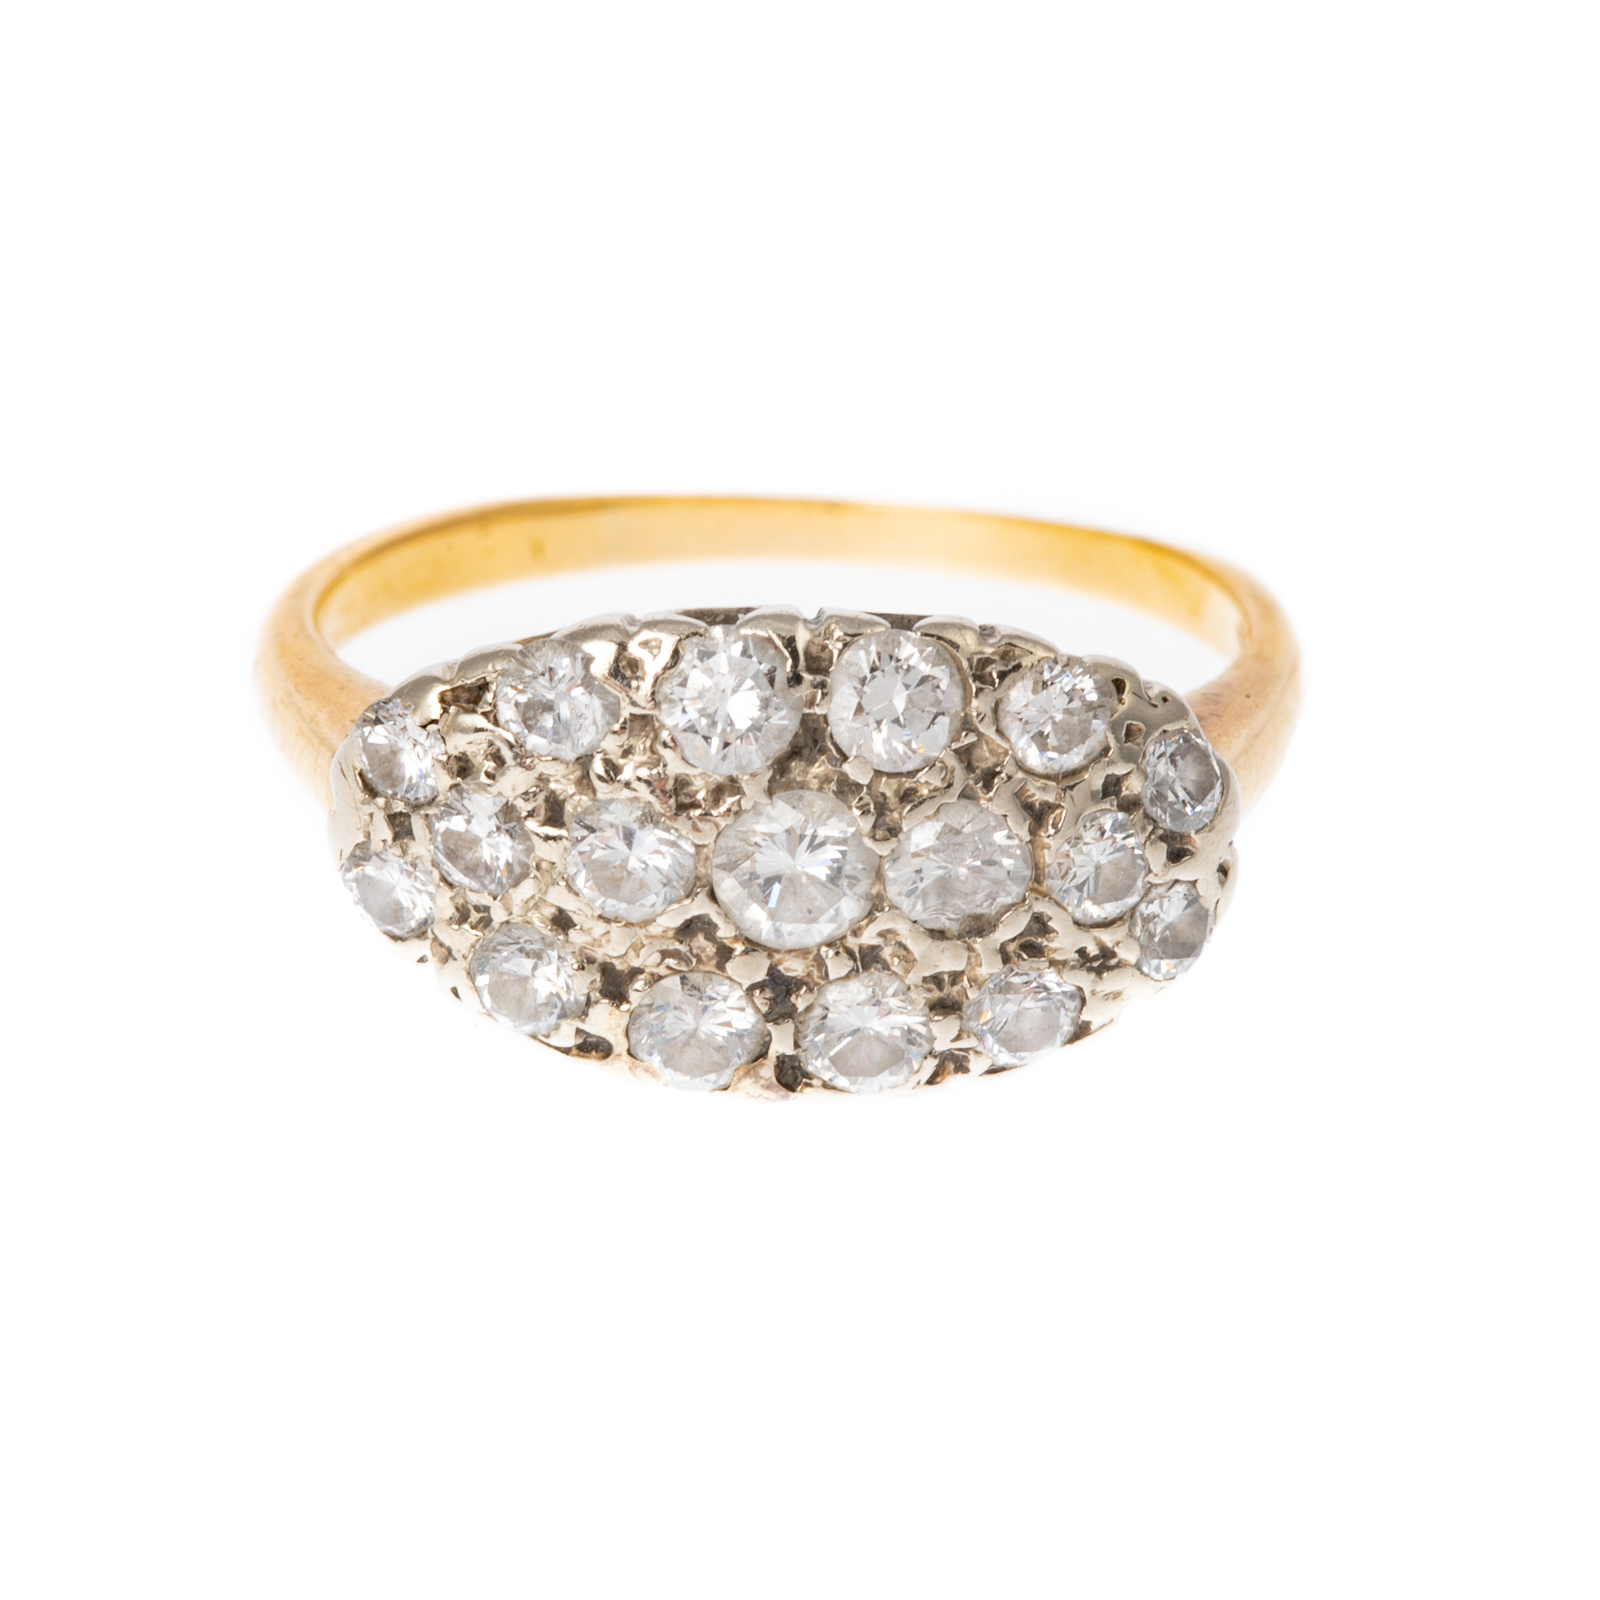 A 14K DIAMOND CLUSTER RING WITH